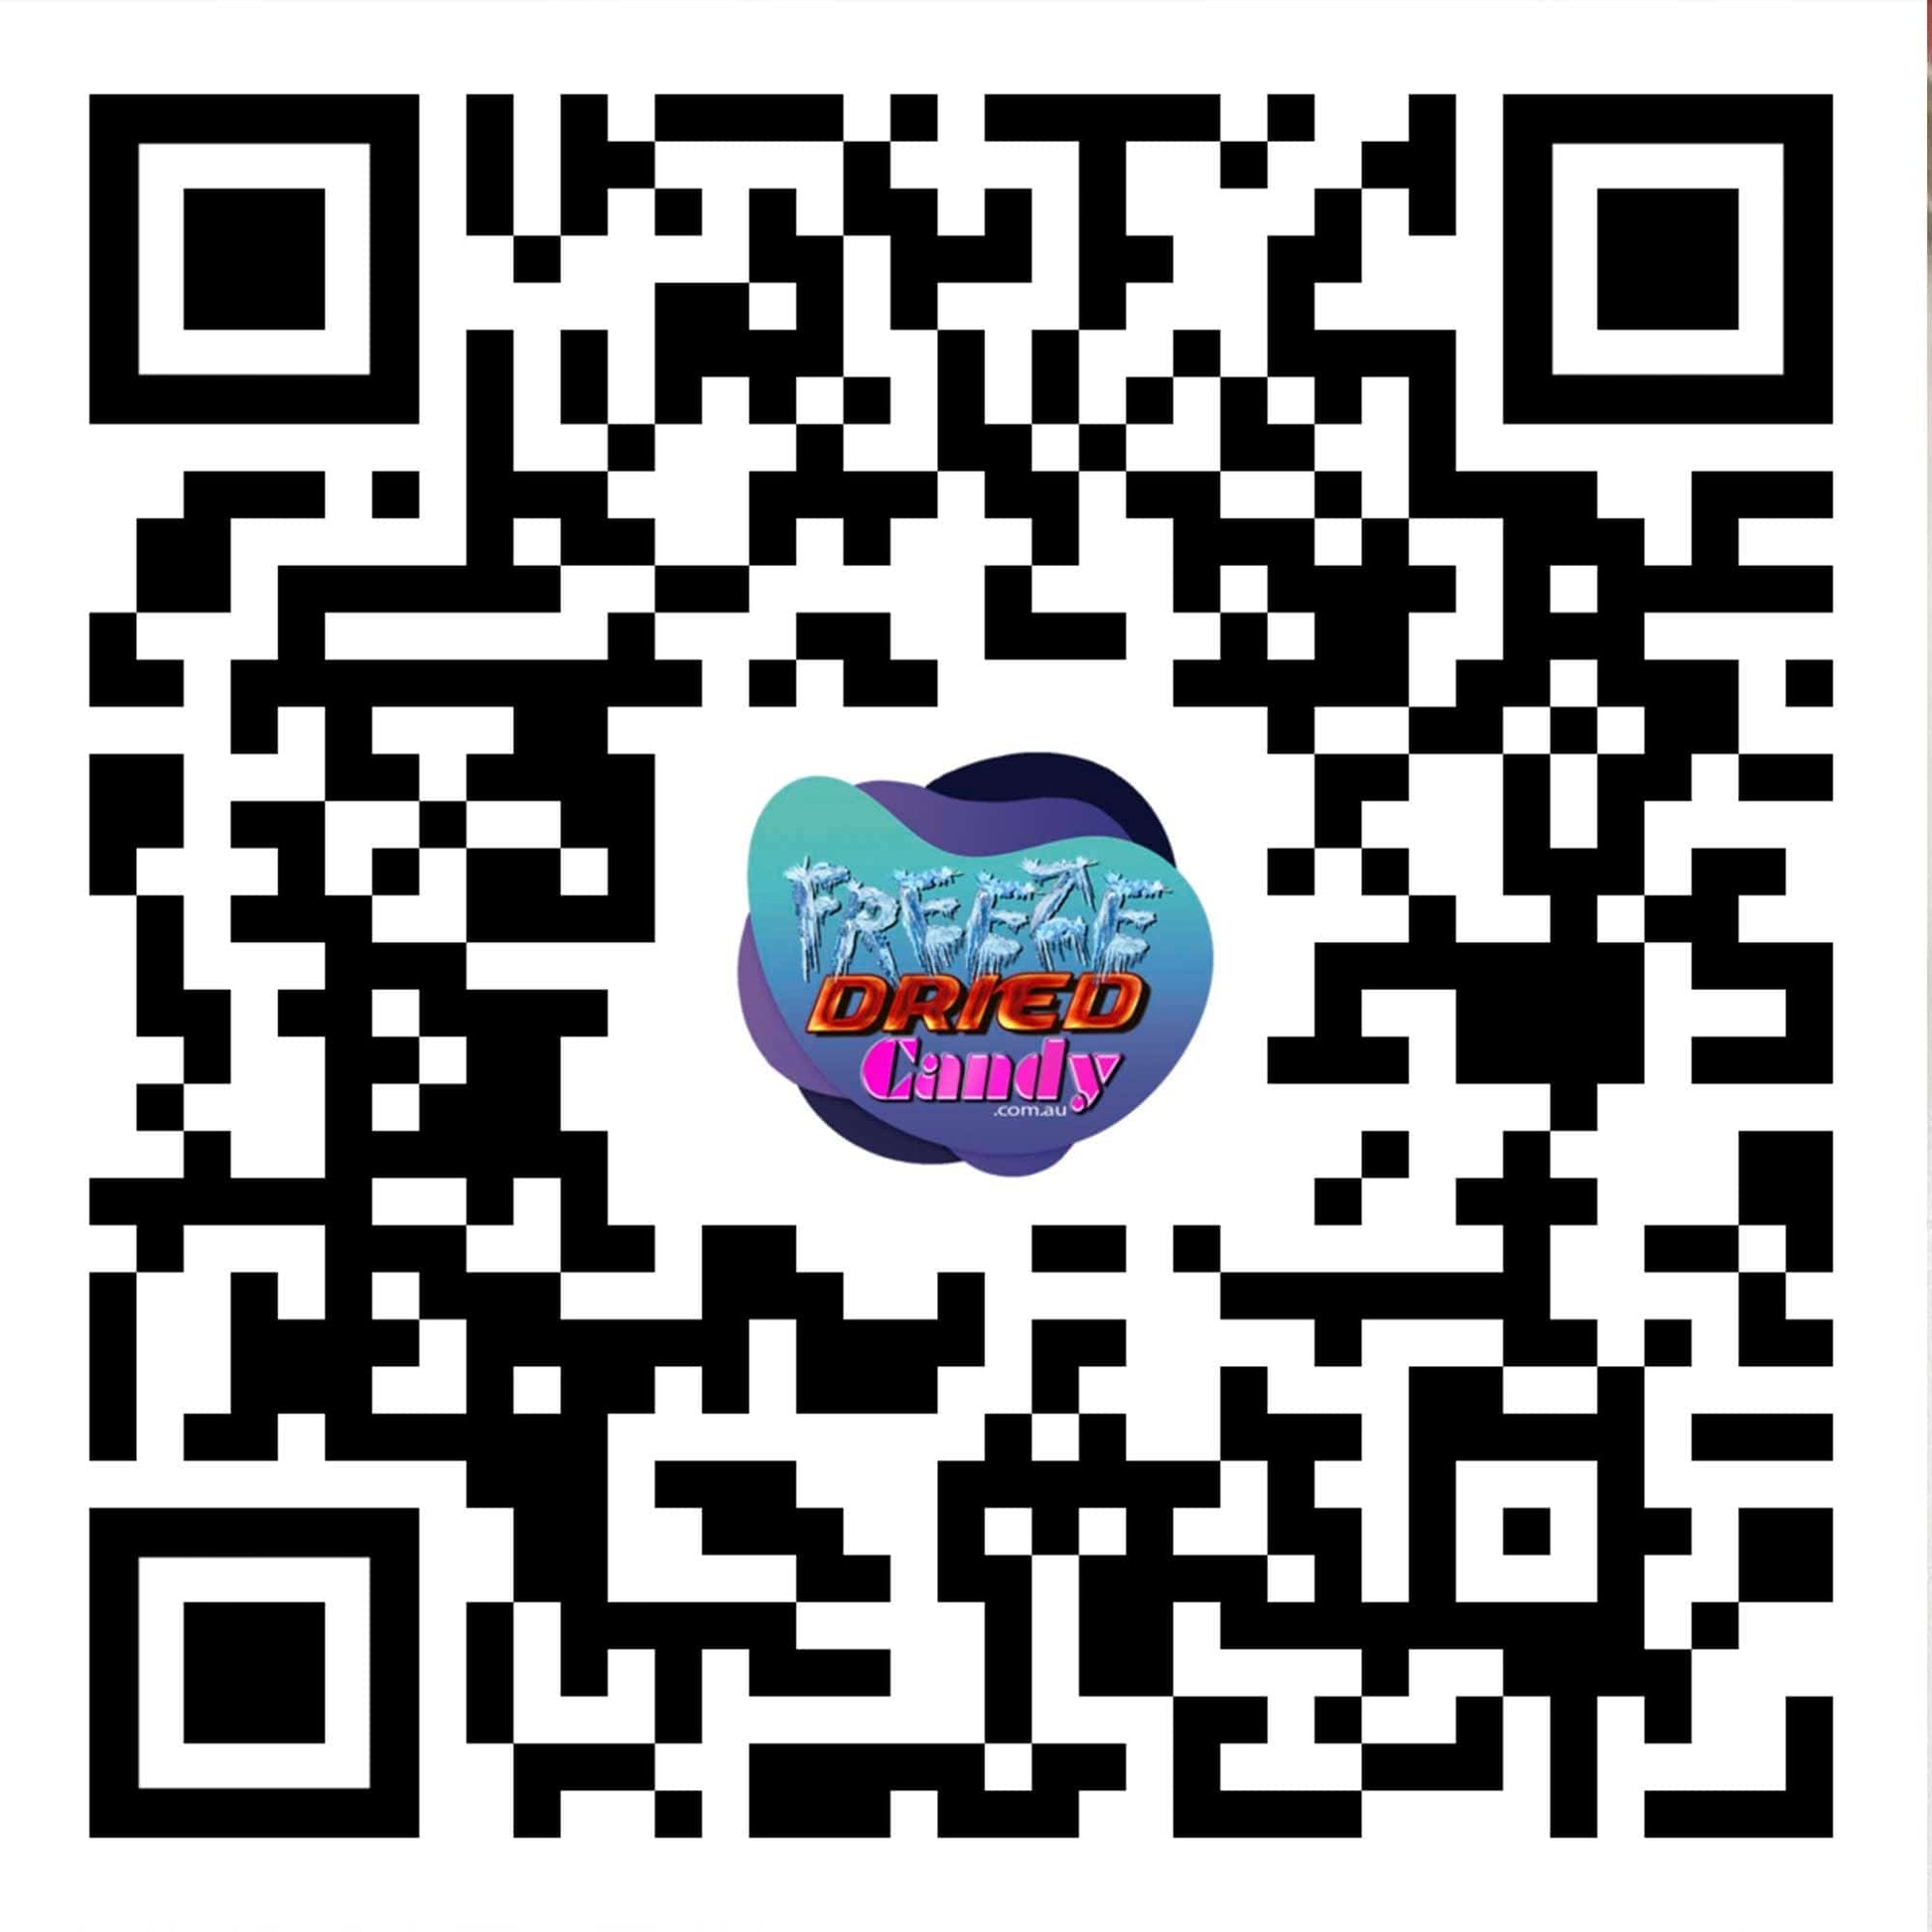 QR code Scan for links  to all  Freeze Dried Candy Website and Soical Media Profiles